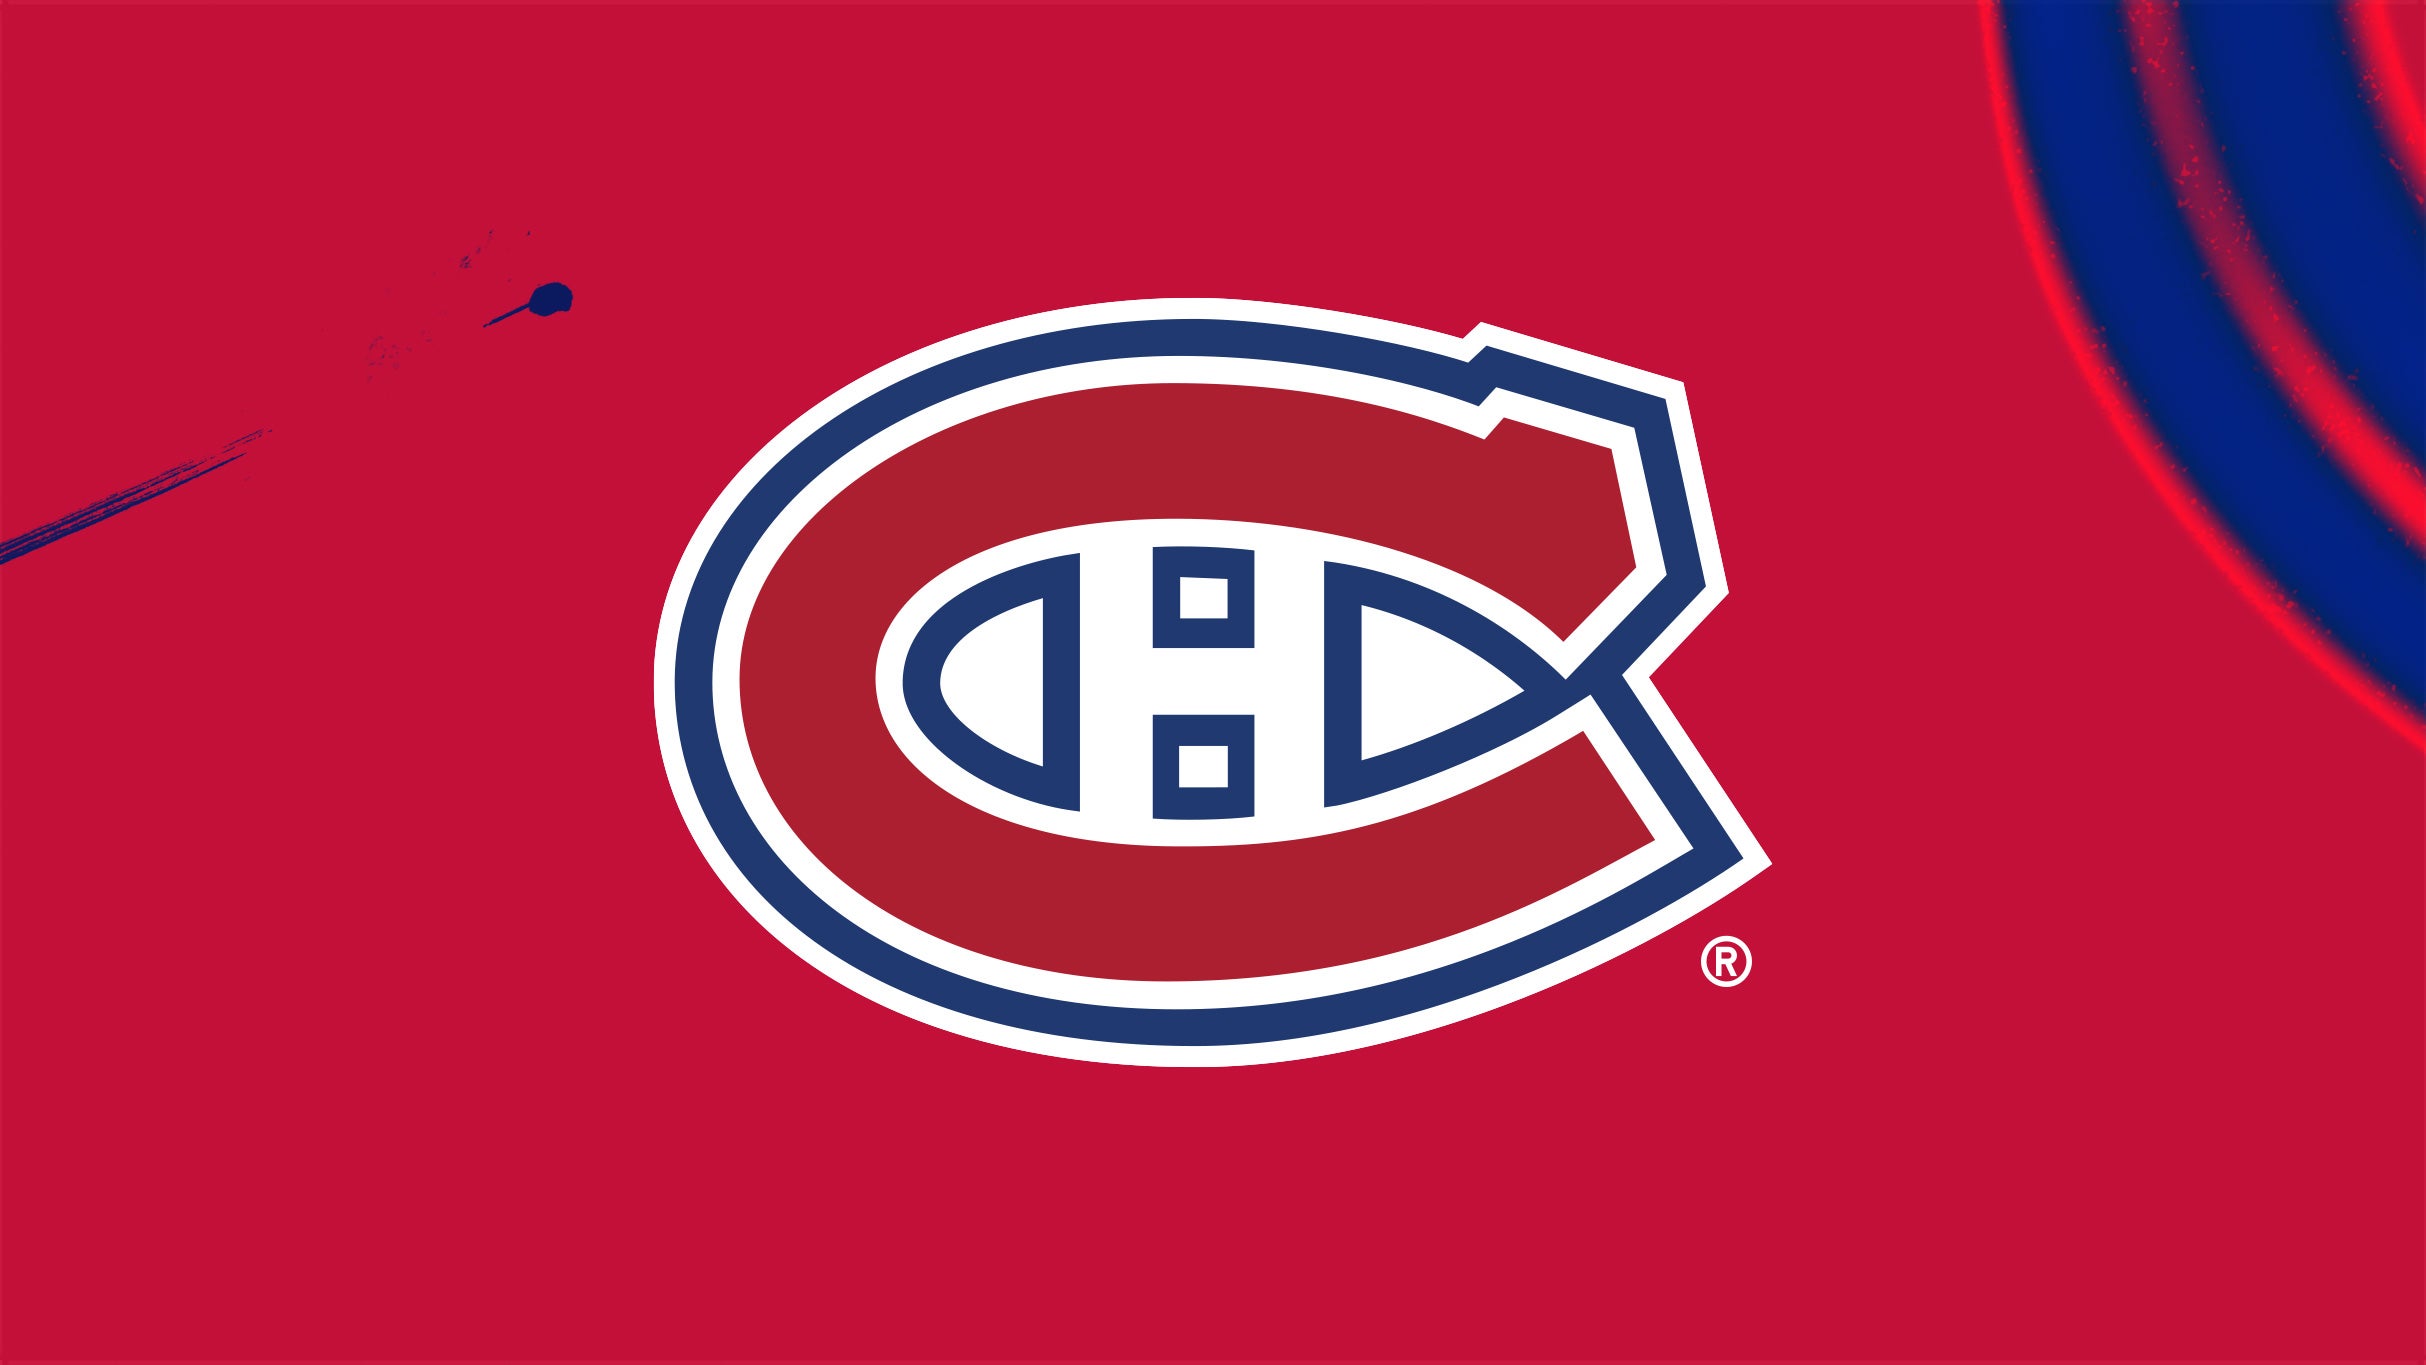 Montreal Canadiens vs. Boston Bruins in Montreal promo photo for Resale presale offer code